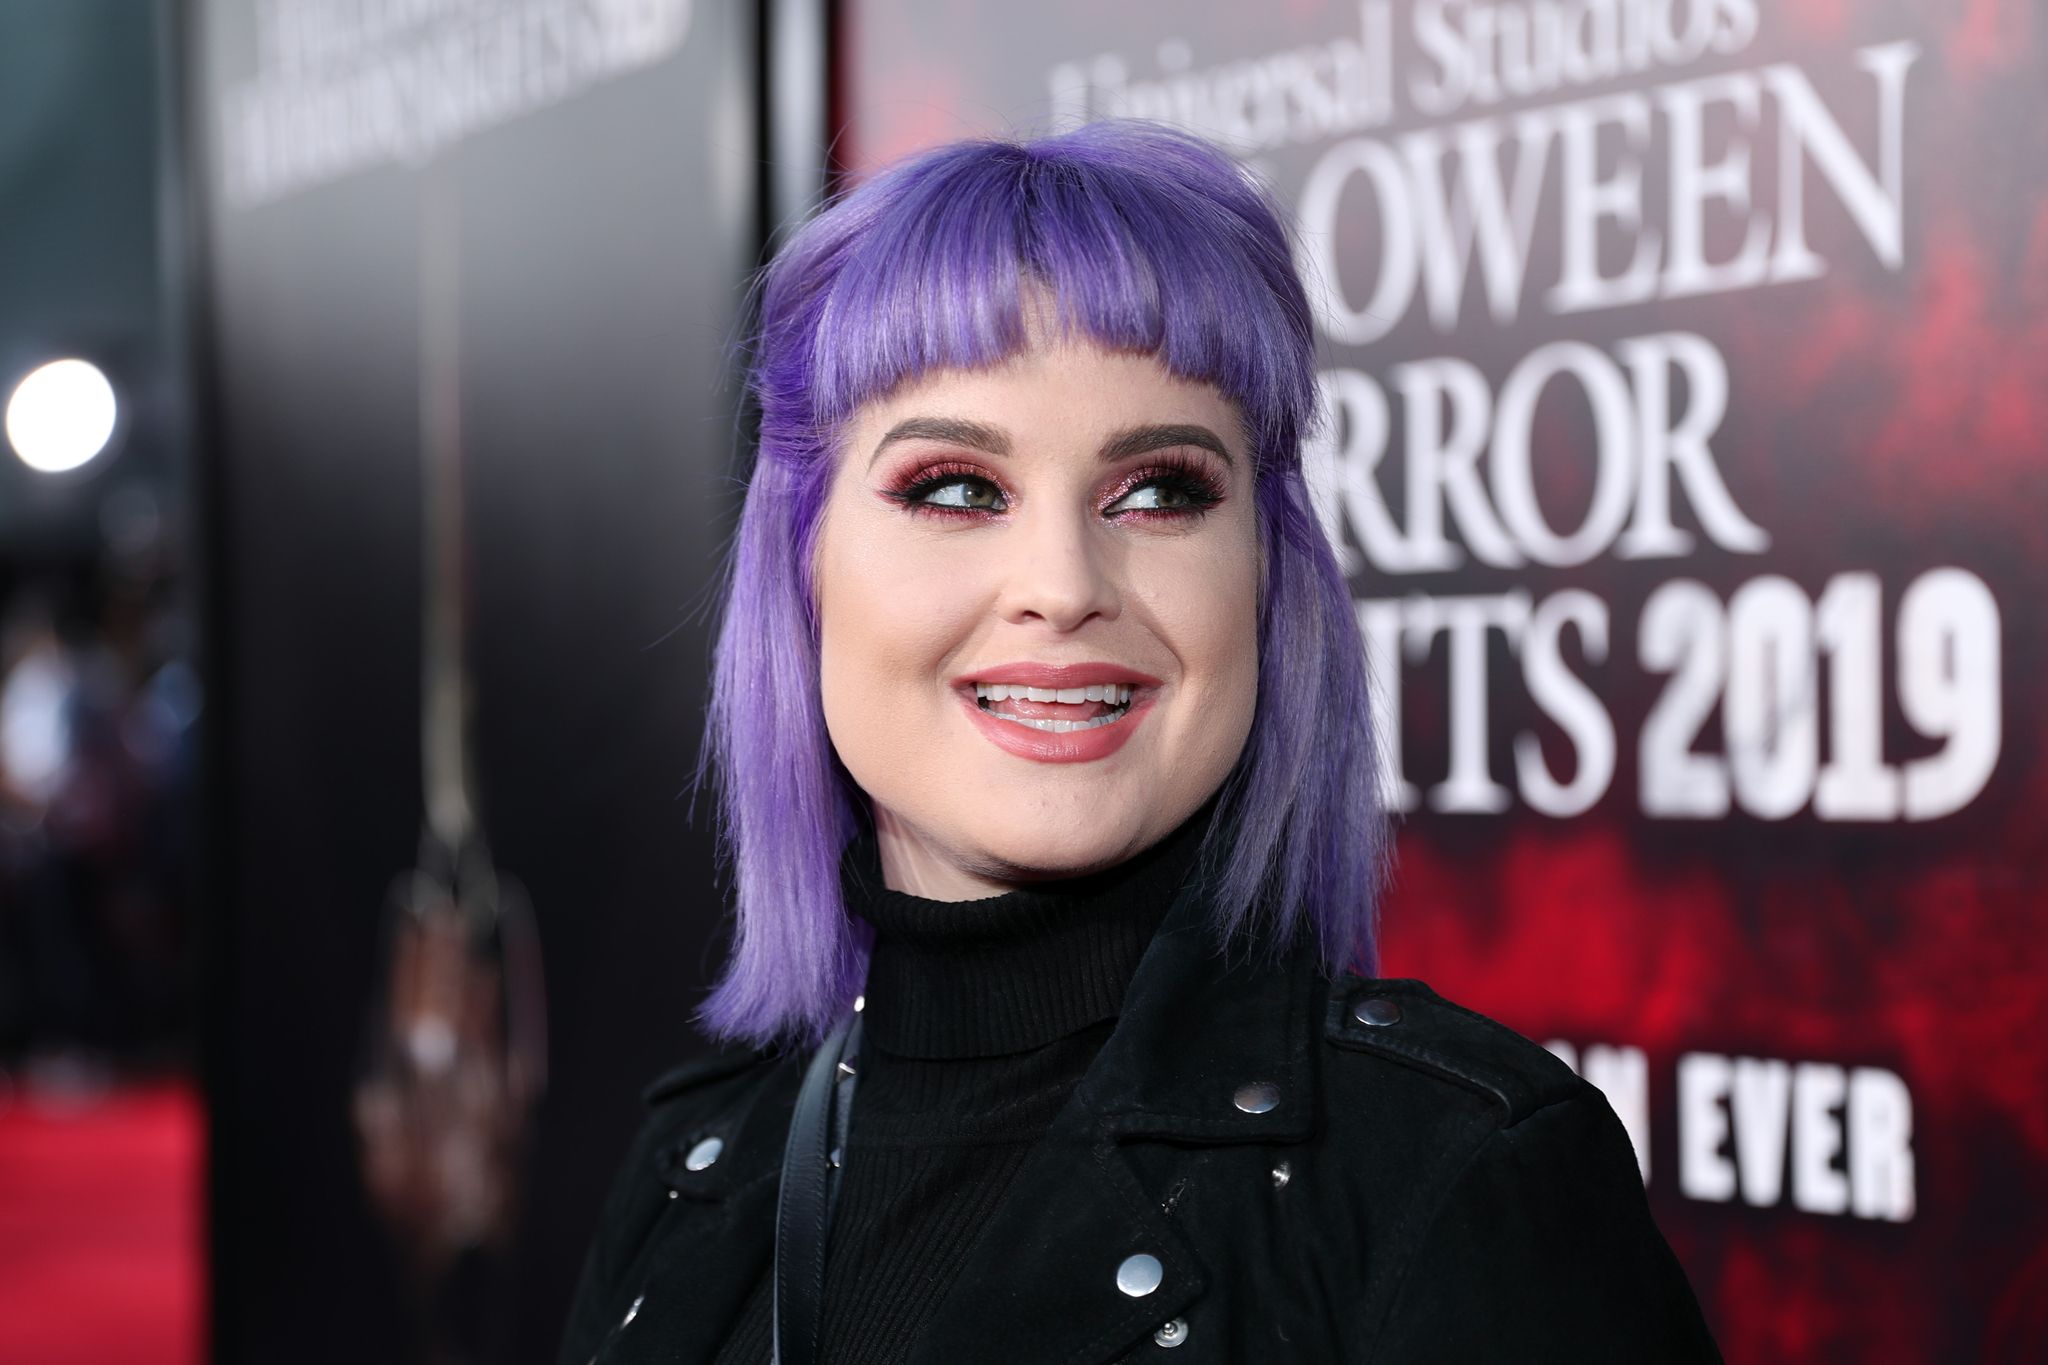 Kelly Osbourne at Halloween Horror Nights at Universal Studios Hollywood on September 12, 2019 in Universal City, California. | Photo: Getty Images